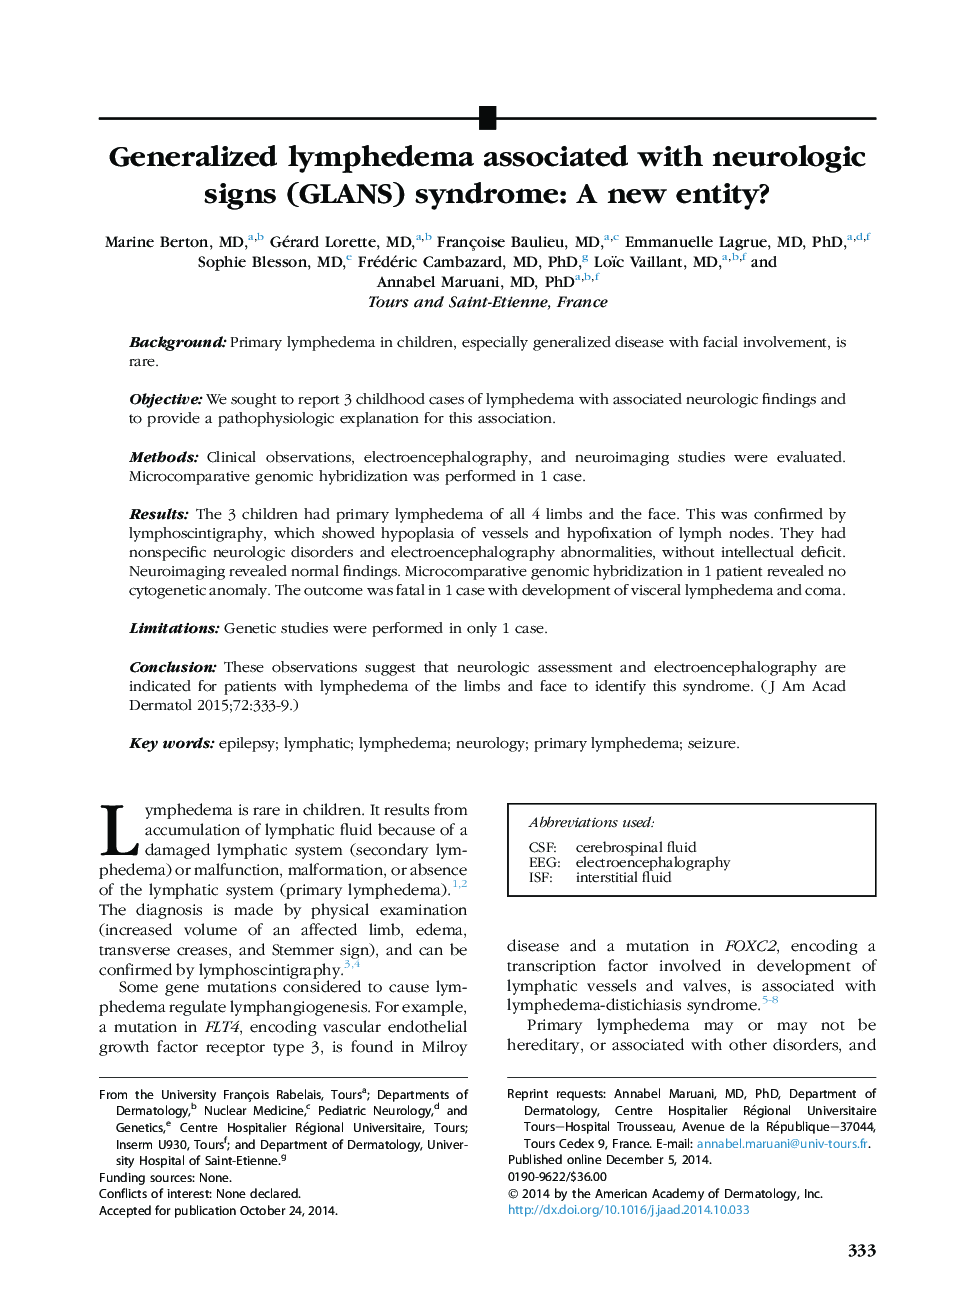 Generalized lymphedema associated with neurologic signs (GLANS) syndrome: A new entity? 